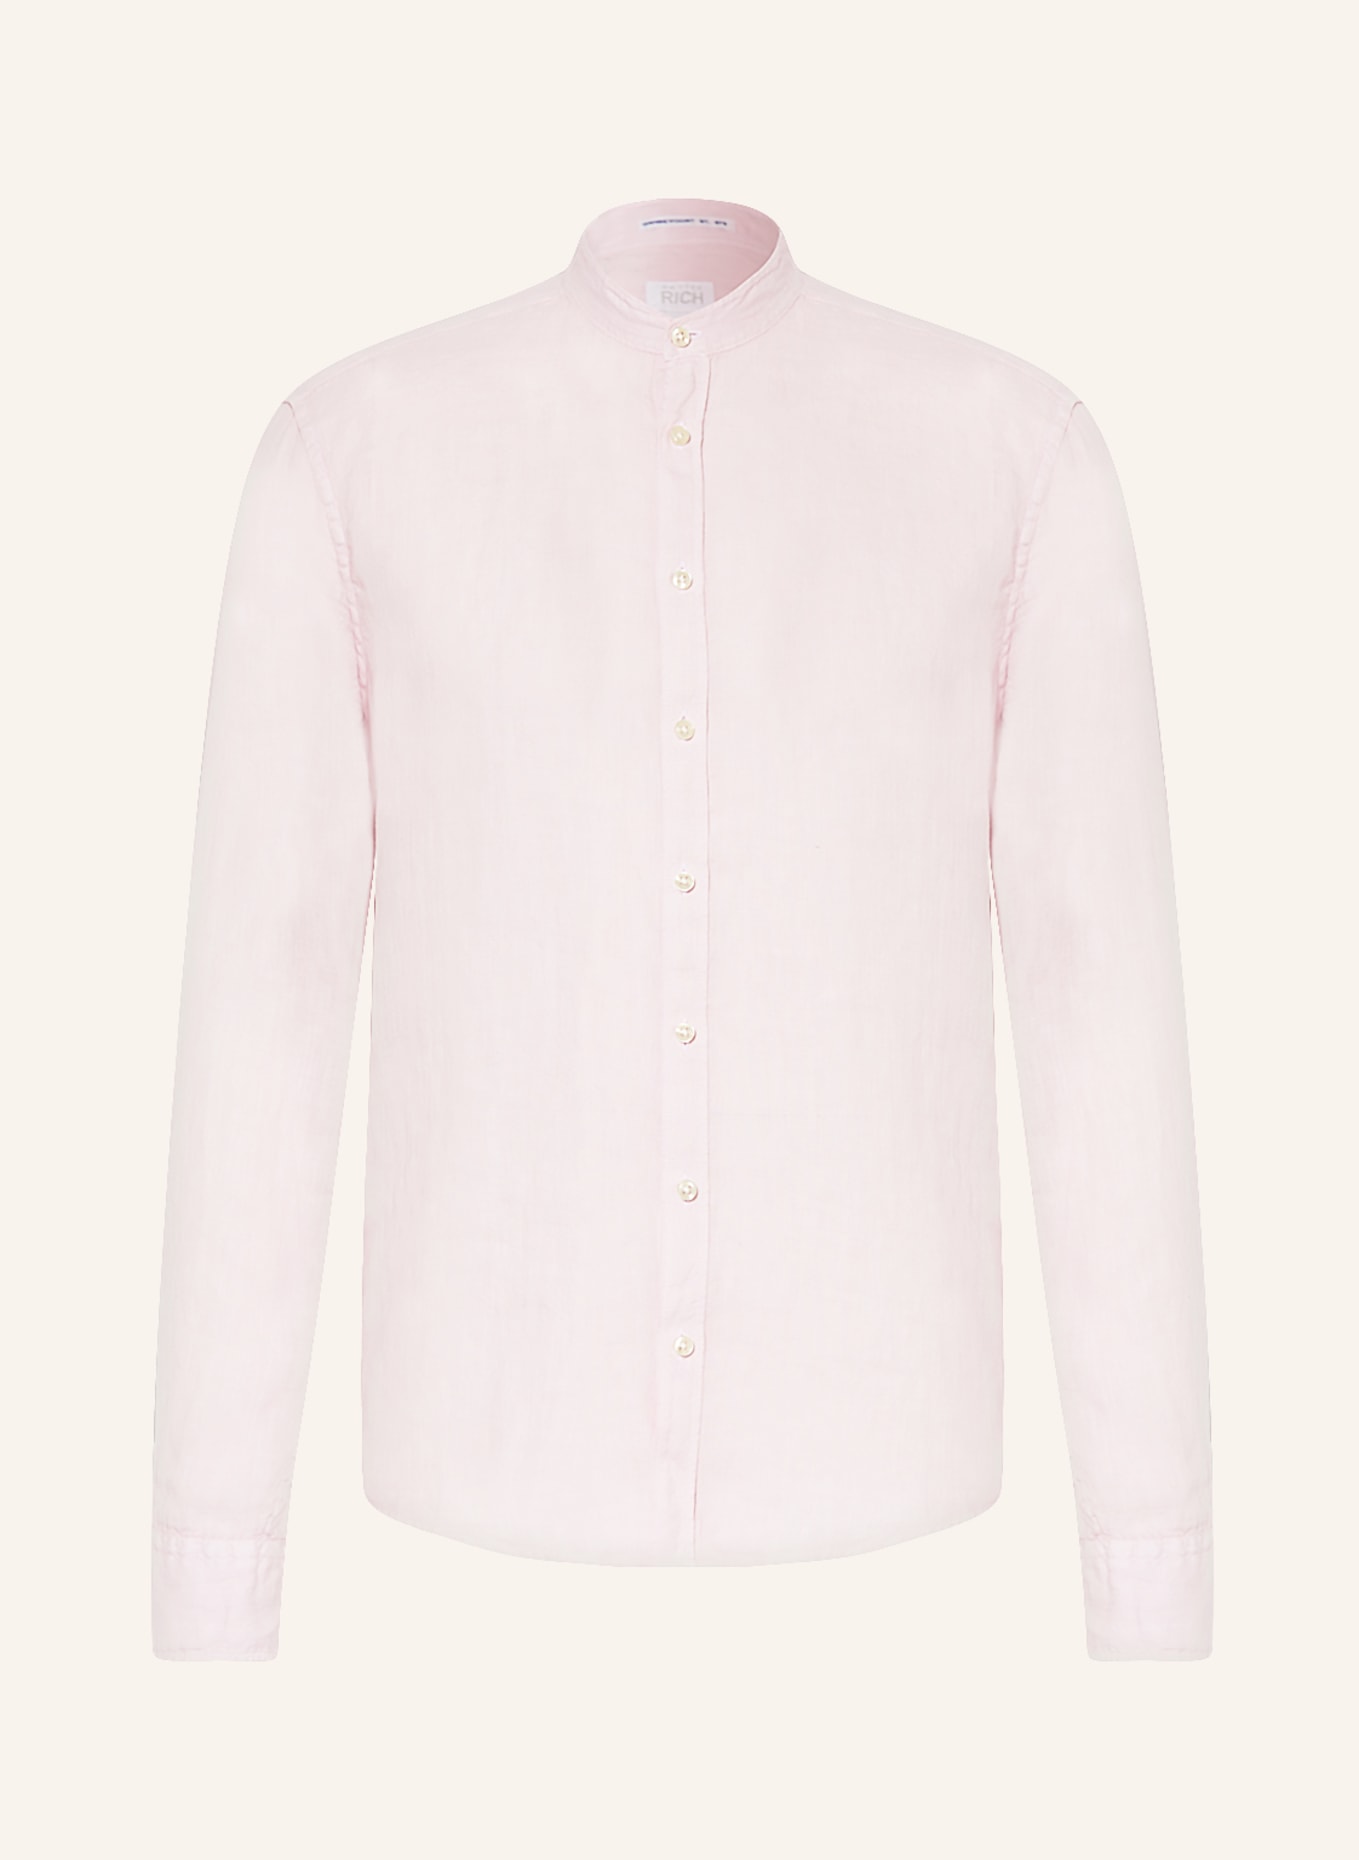 BETTER RICH Linen shirt regular fit with stand-up collar, Color: PINK (Image 1)